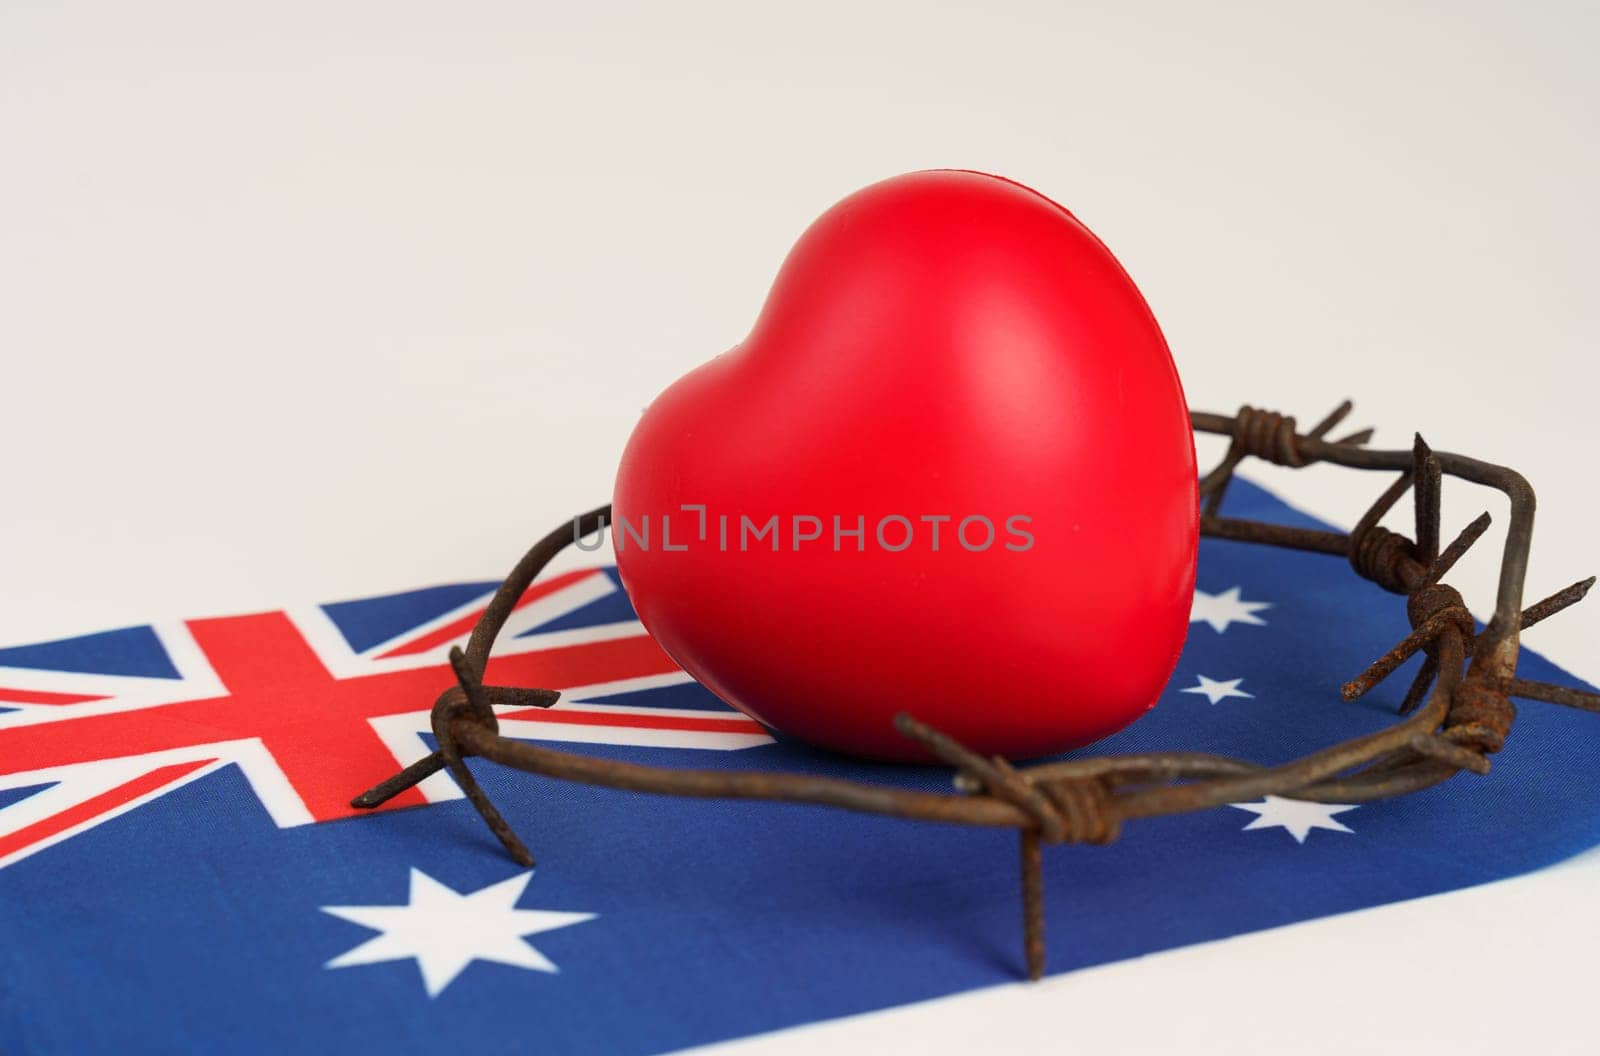 A vibrant red heart wrapped in barbed wire sits atop an Australian flag, depicting a struggle for love and freedom amidst constraints.